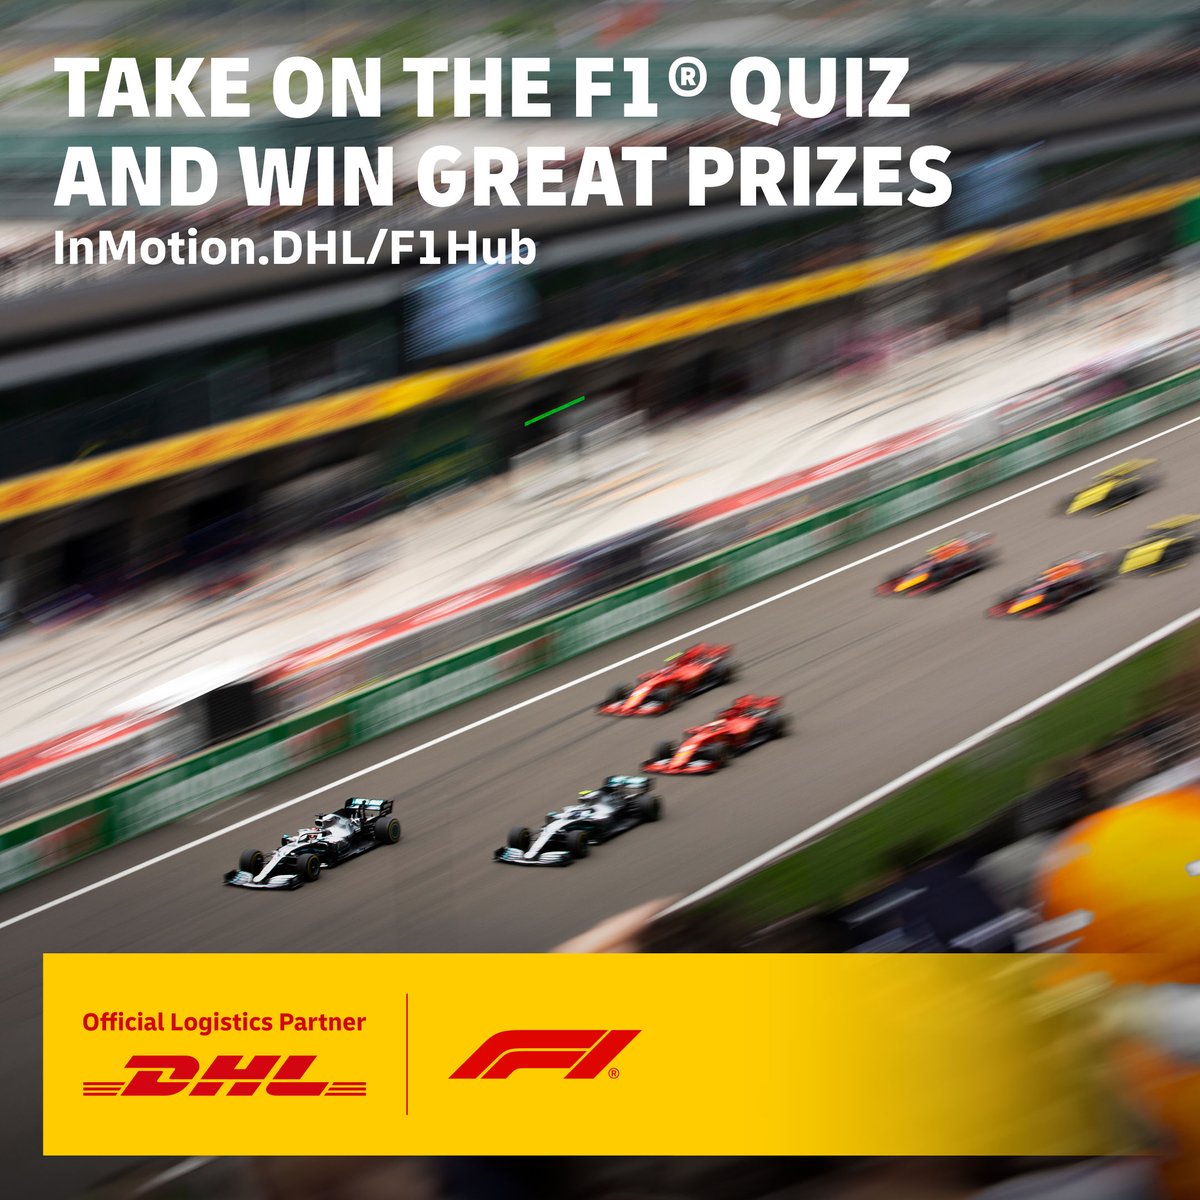 How much do you know about the #ChineseGP? Test your knowledge in our #F1 quiz and win amazing prizes. Enter here: InMotion.DHL/F1China